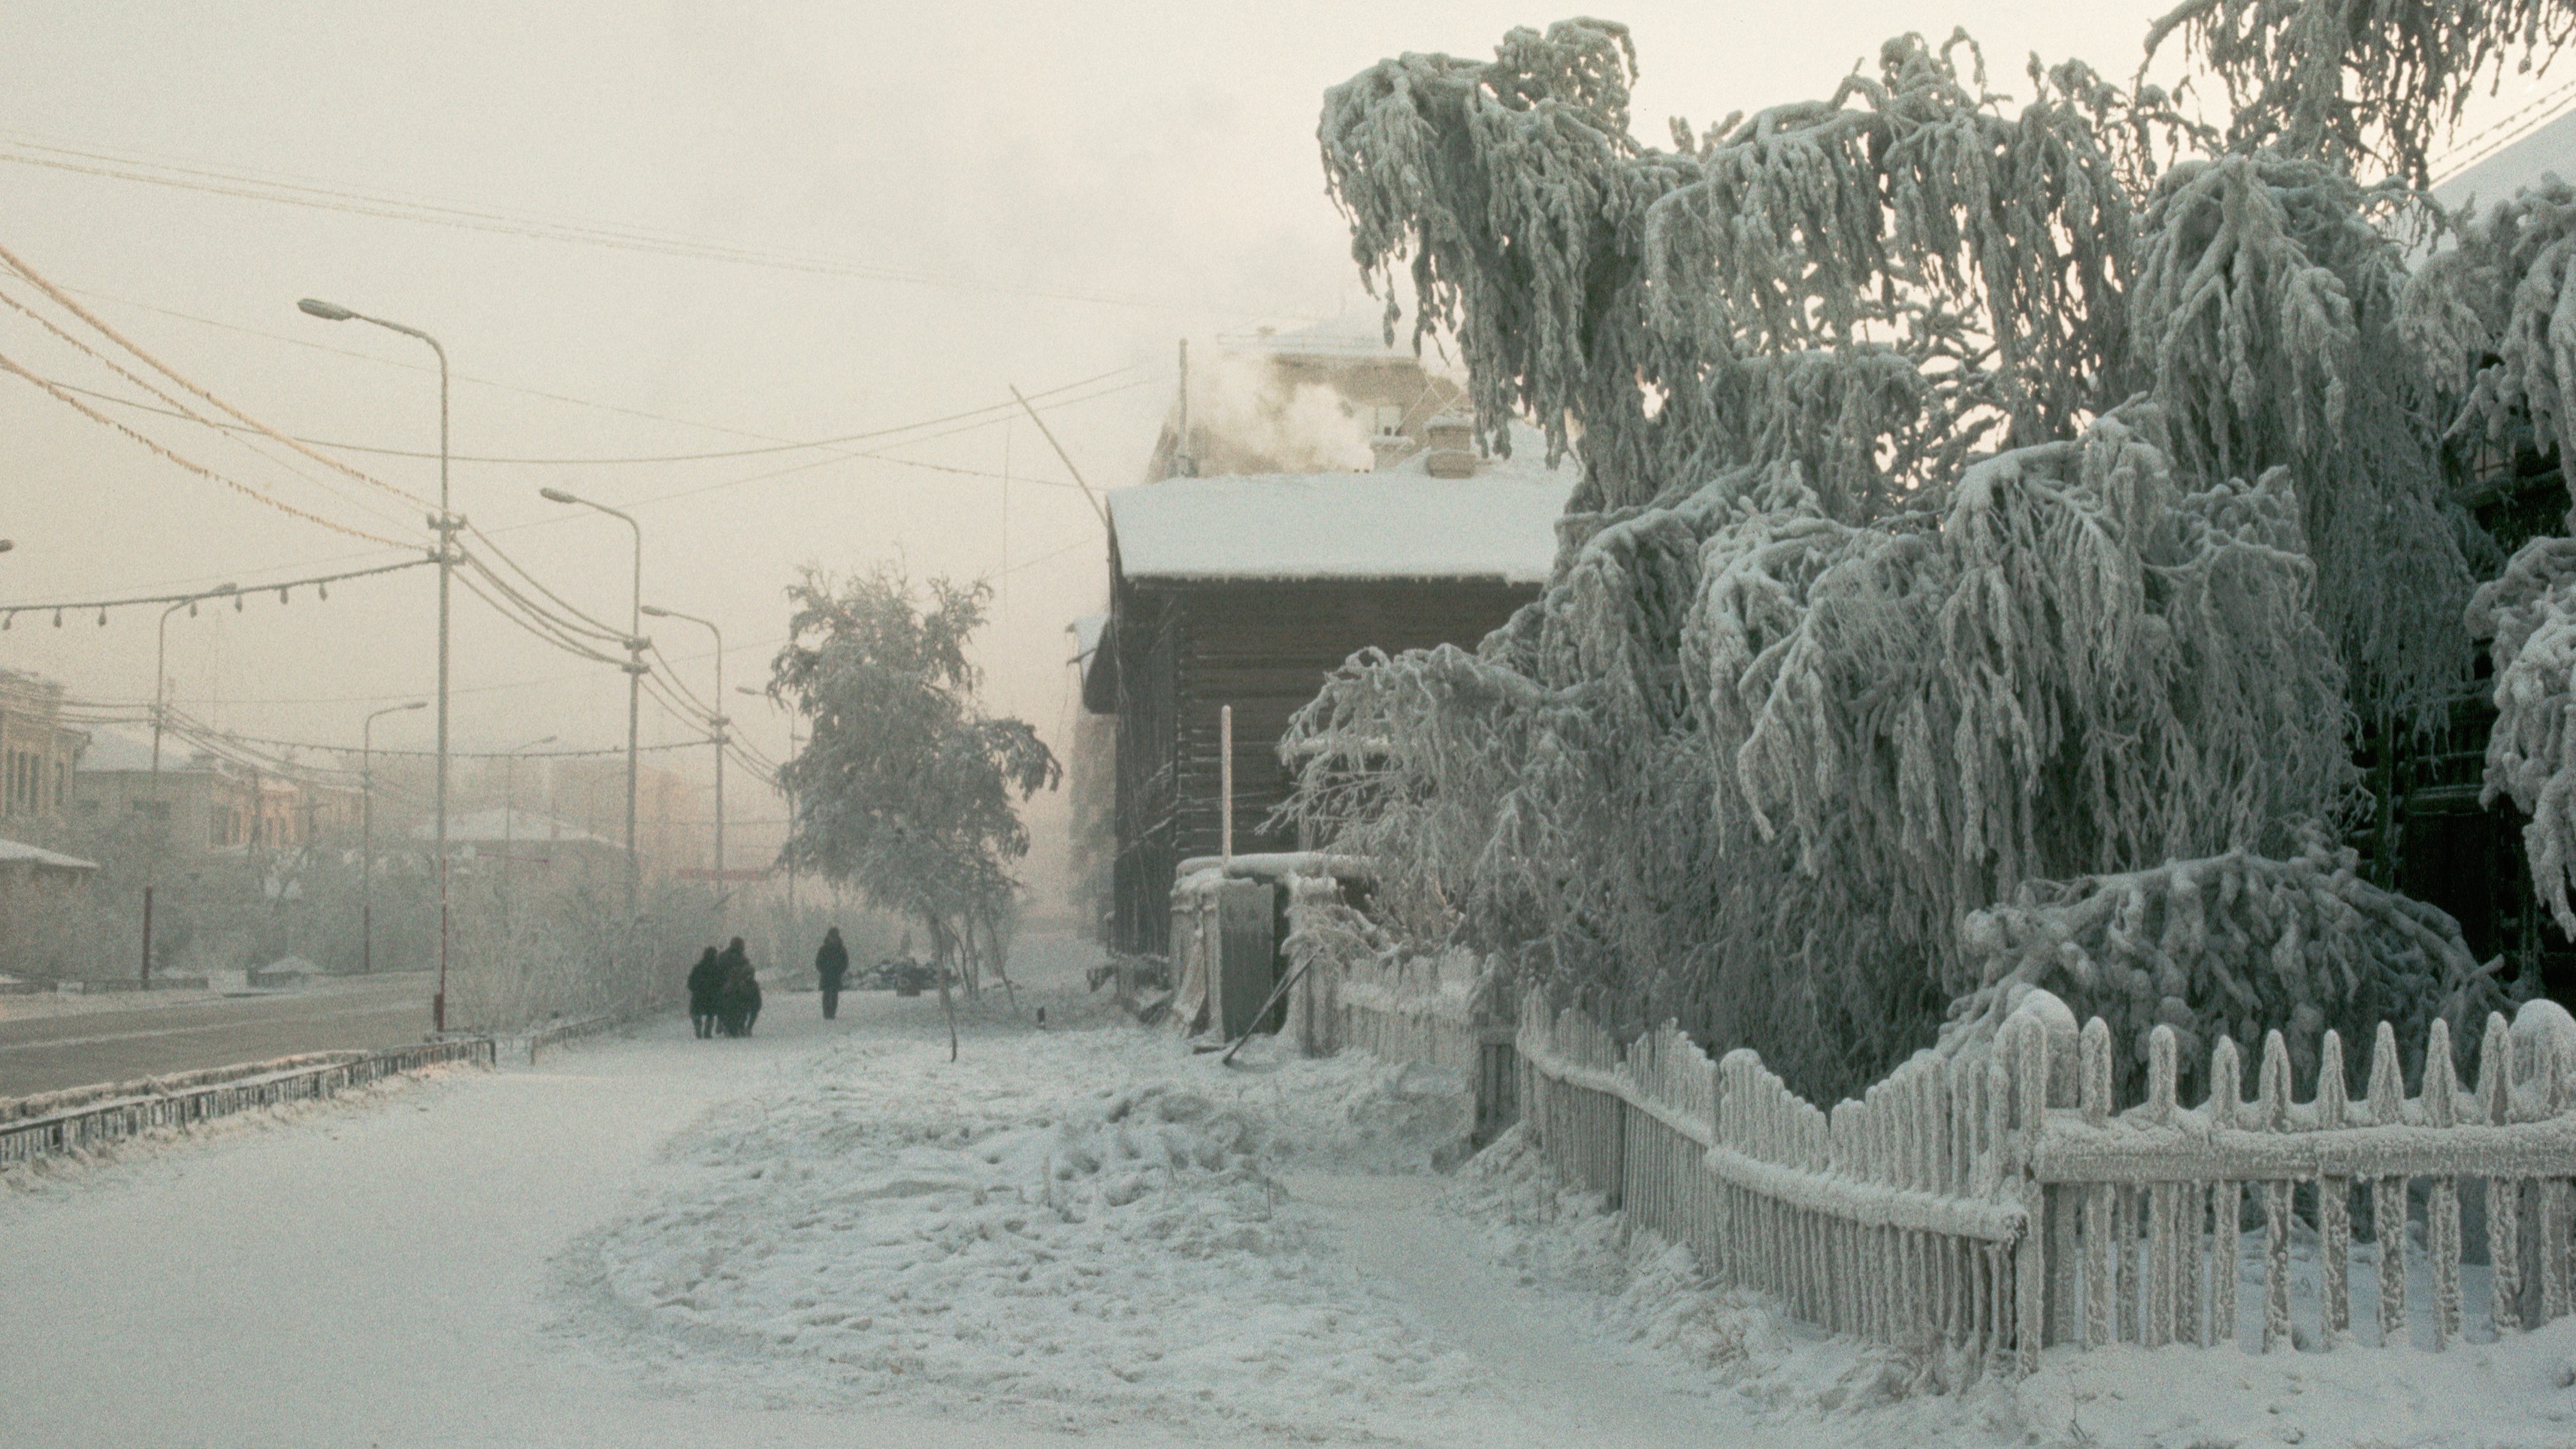 A black building in Yakutsk, Russia, one of the coldest cities on Earth.